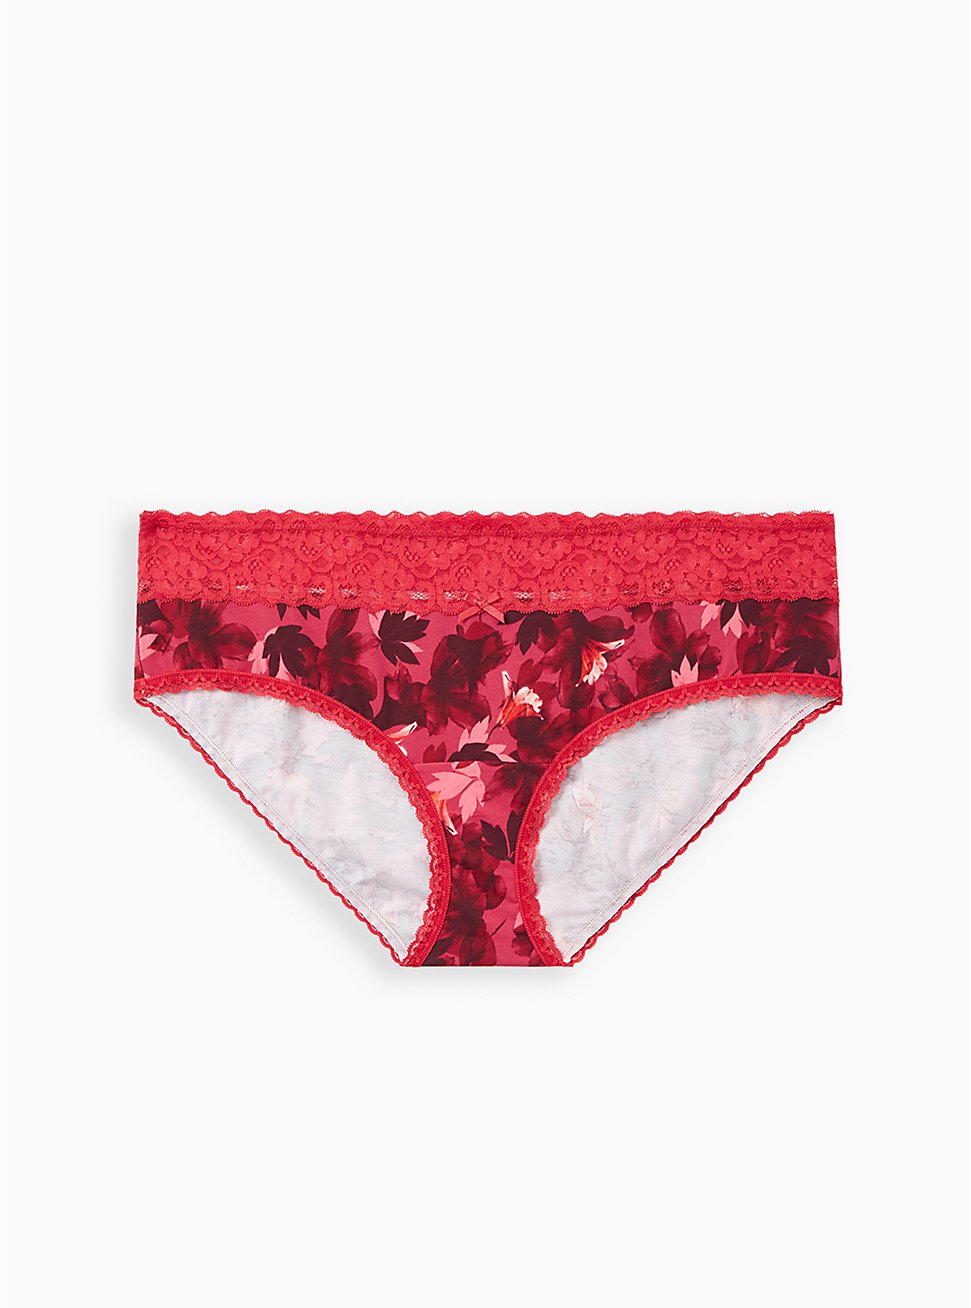 Wide Lace Trim Hipster Panty - Cotton Blooms Red, DRAMATIC BLOOMS RED  , hi-res